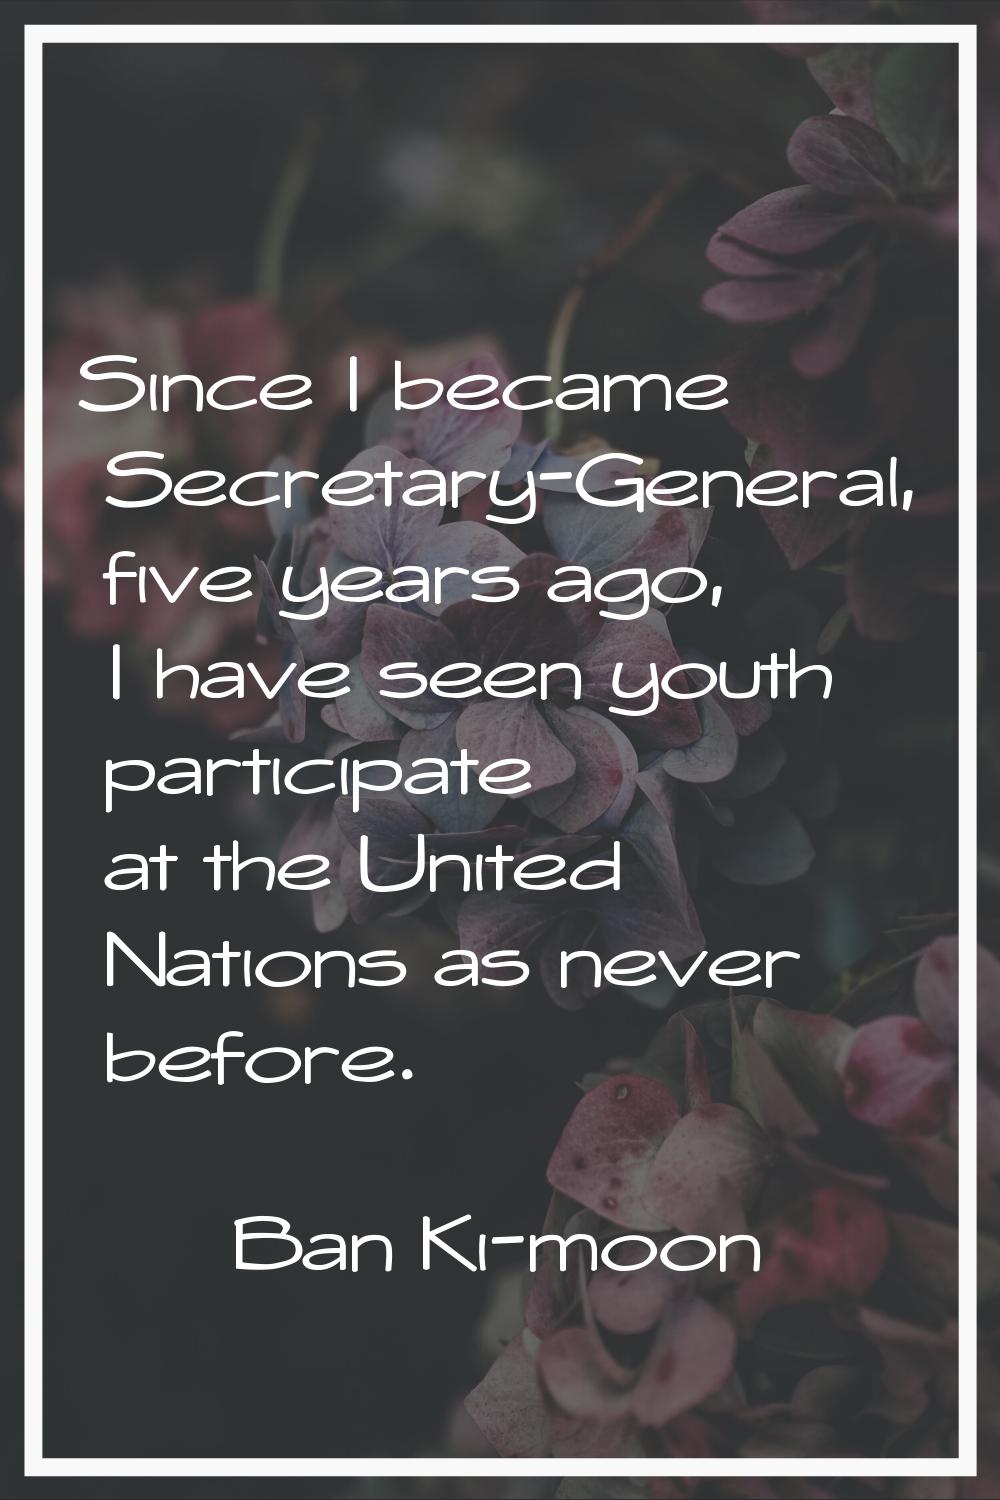 Since I became Secretary-General, five years ago, I have seen youth participate at the United Natio